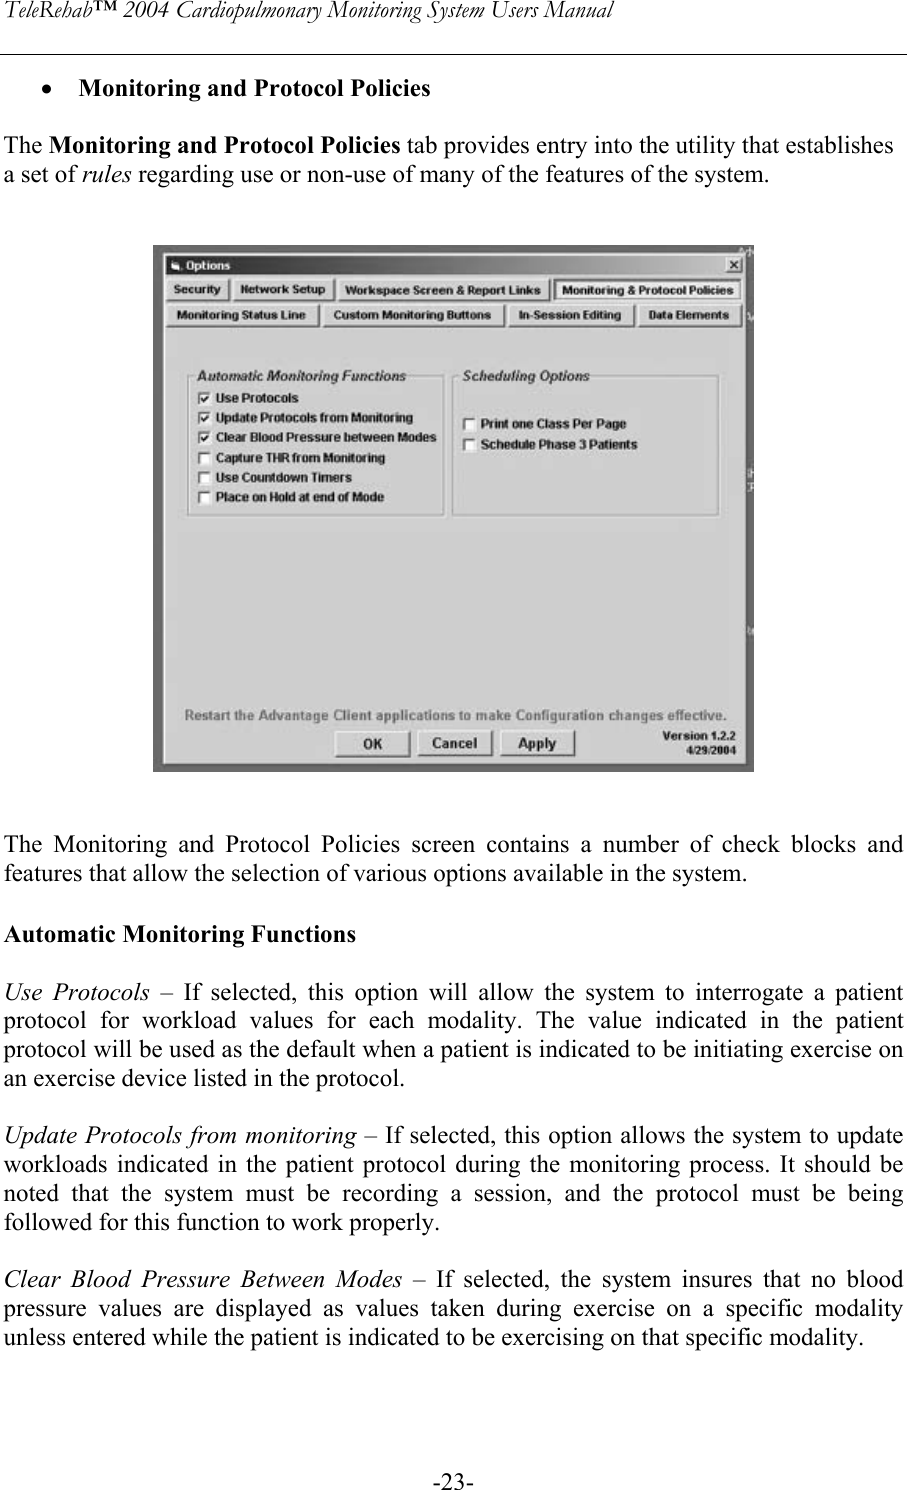 TeleRehab™ 2004 Cardiopulmonary Monitoring System Users Manual    -23-• Monitoring and Protocol Policies  The Monitoring and Protocol Policies tab provides entry into the utility that establishes a set of rules regarding use or non-use of many of the features of the system.      The Monitoring and Protocol Policies screen contains a number of check blocks and features that allow the selection of various options available in the system.   Automatic Monitoring Functions  Use Protocols – If selected, this option will allow the system to interrogate a patient protocol for workload values for each modality. The value indicated in the patient protocol will be used as the default when a patient is indicated to be initiating exercise on an exercise device listed in the protocol.   Update Protocols from monitoring – If selected, this option allows the system to update workloads indicated in the patient protocol during the monitoring process. It should be noted that the system must be recording a session, and the protocol must be being followed for this function to work properly.   Clear Blood Pressure Between Modes – If selected, the system insures that no blood pressure values are displayed as values taken during exercise on a specific modality unless entered while the patient is indicated to be exercising on that specific modality.  